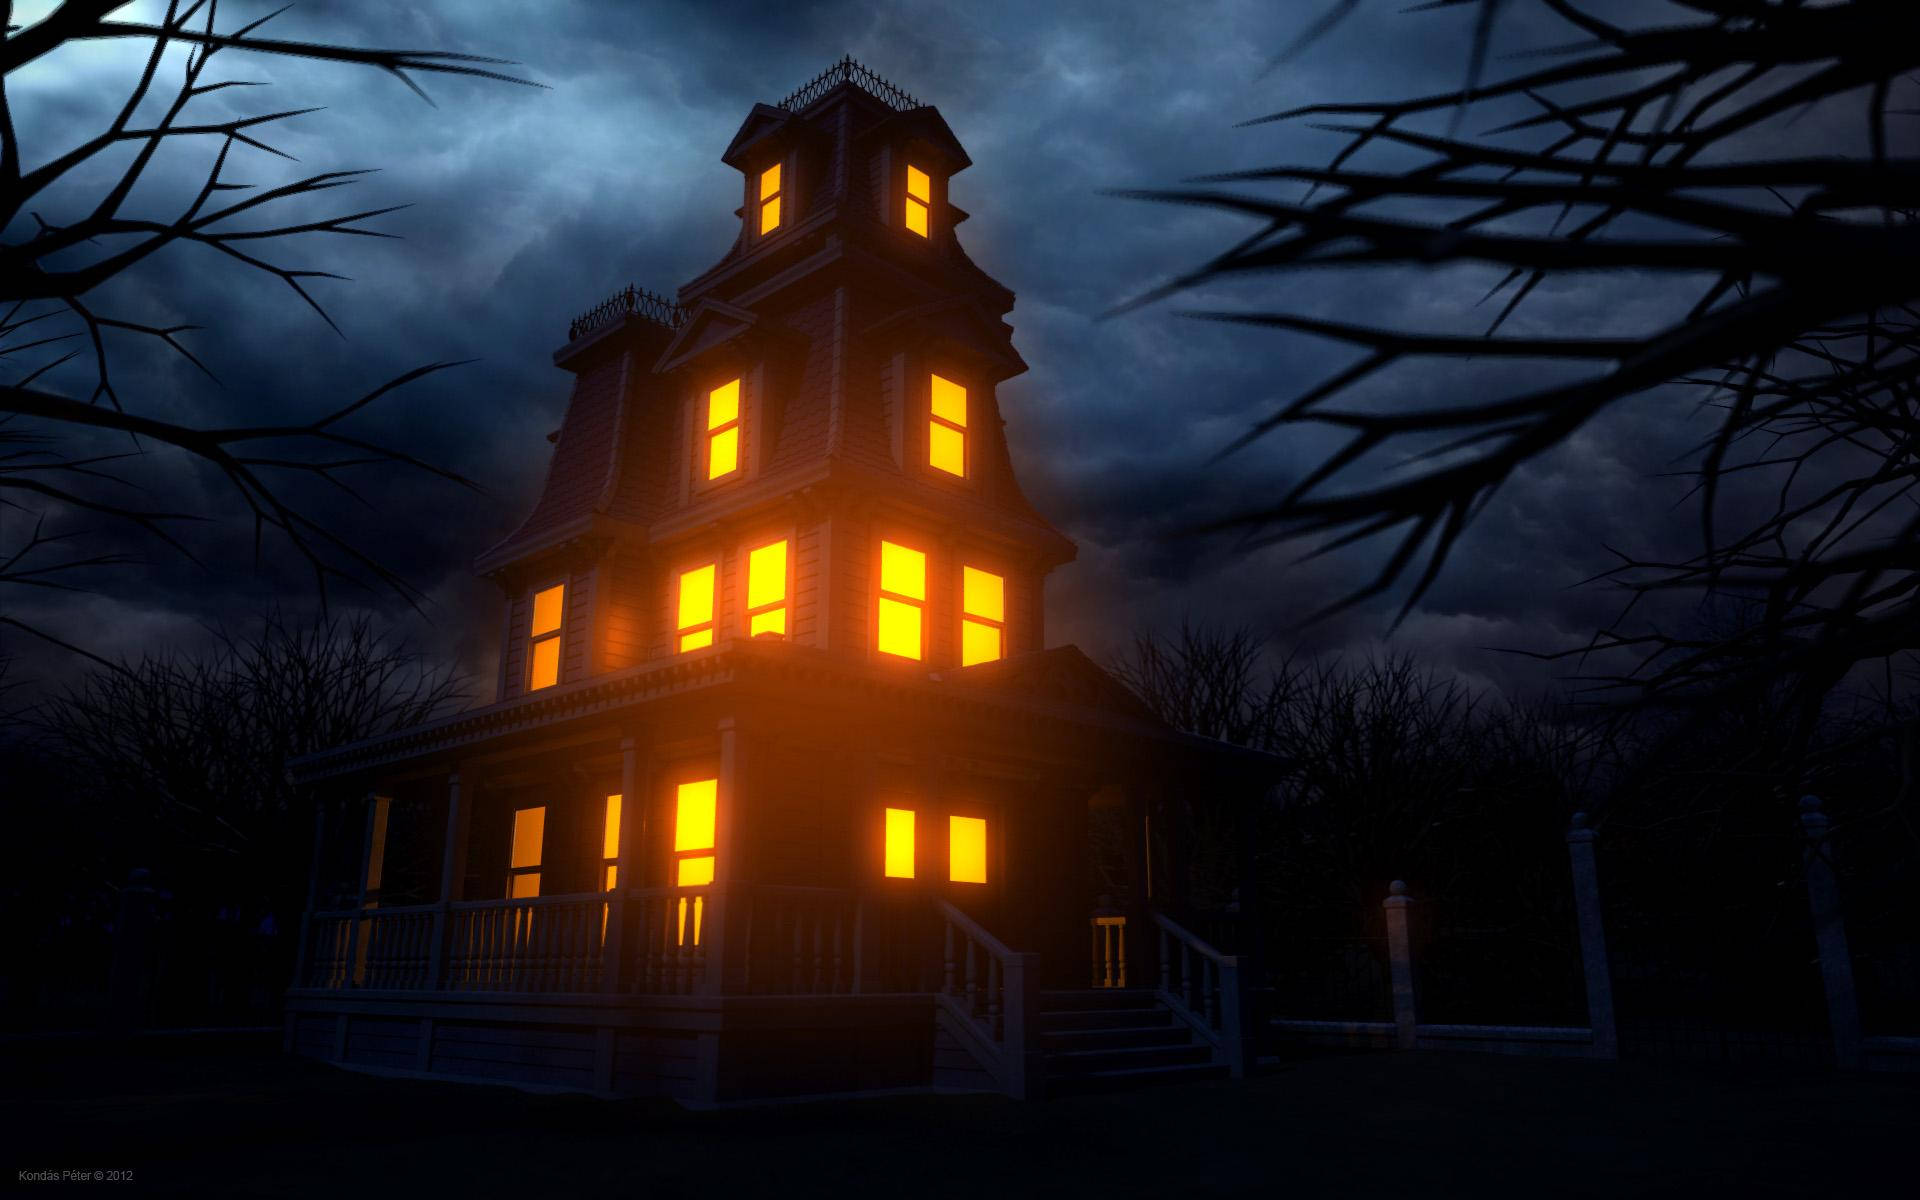 Welcome to the dark and mysterious Haunted House on Halloween night. Wallpaper